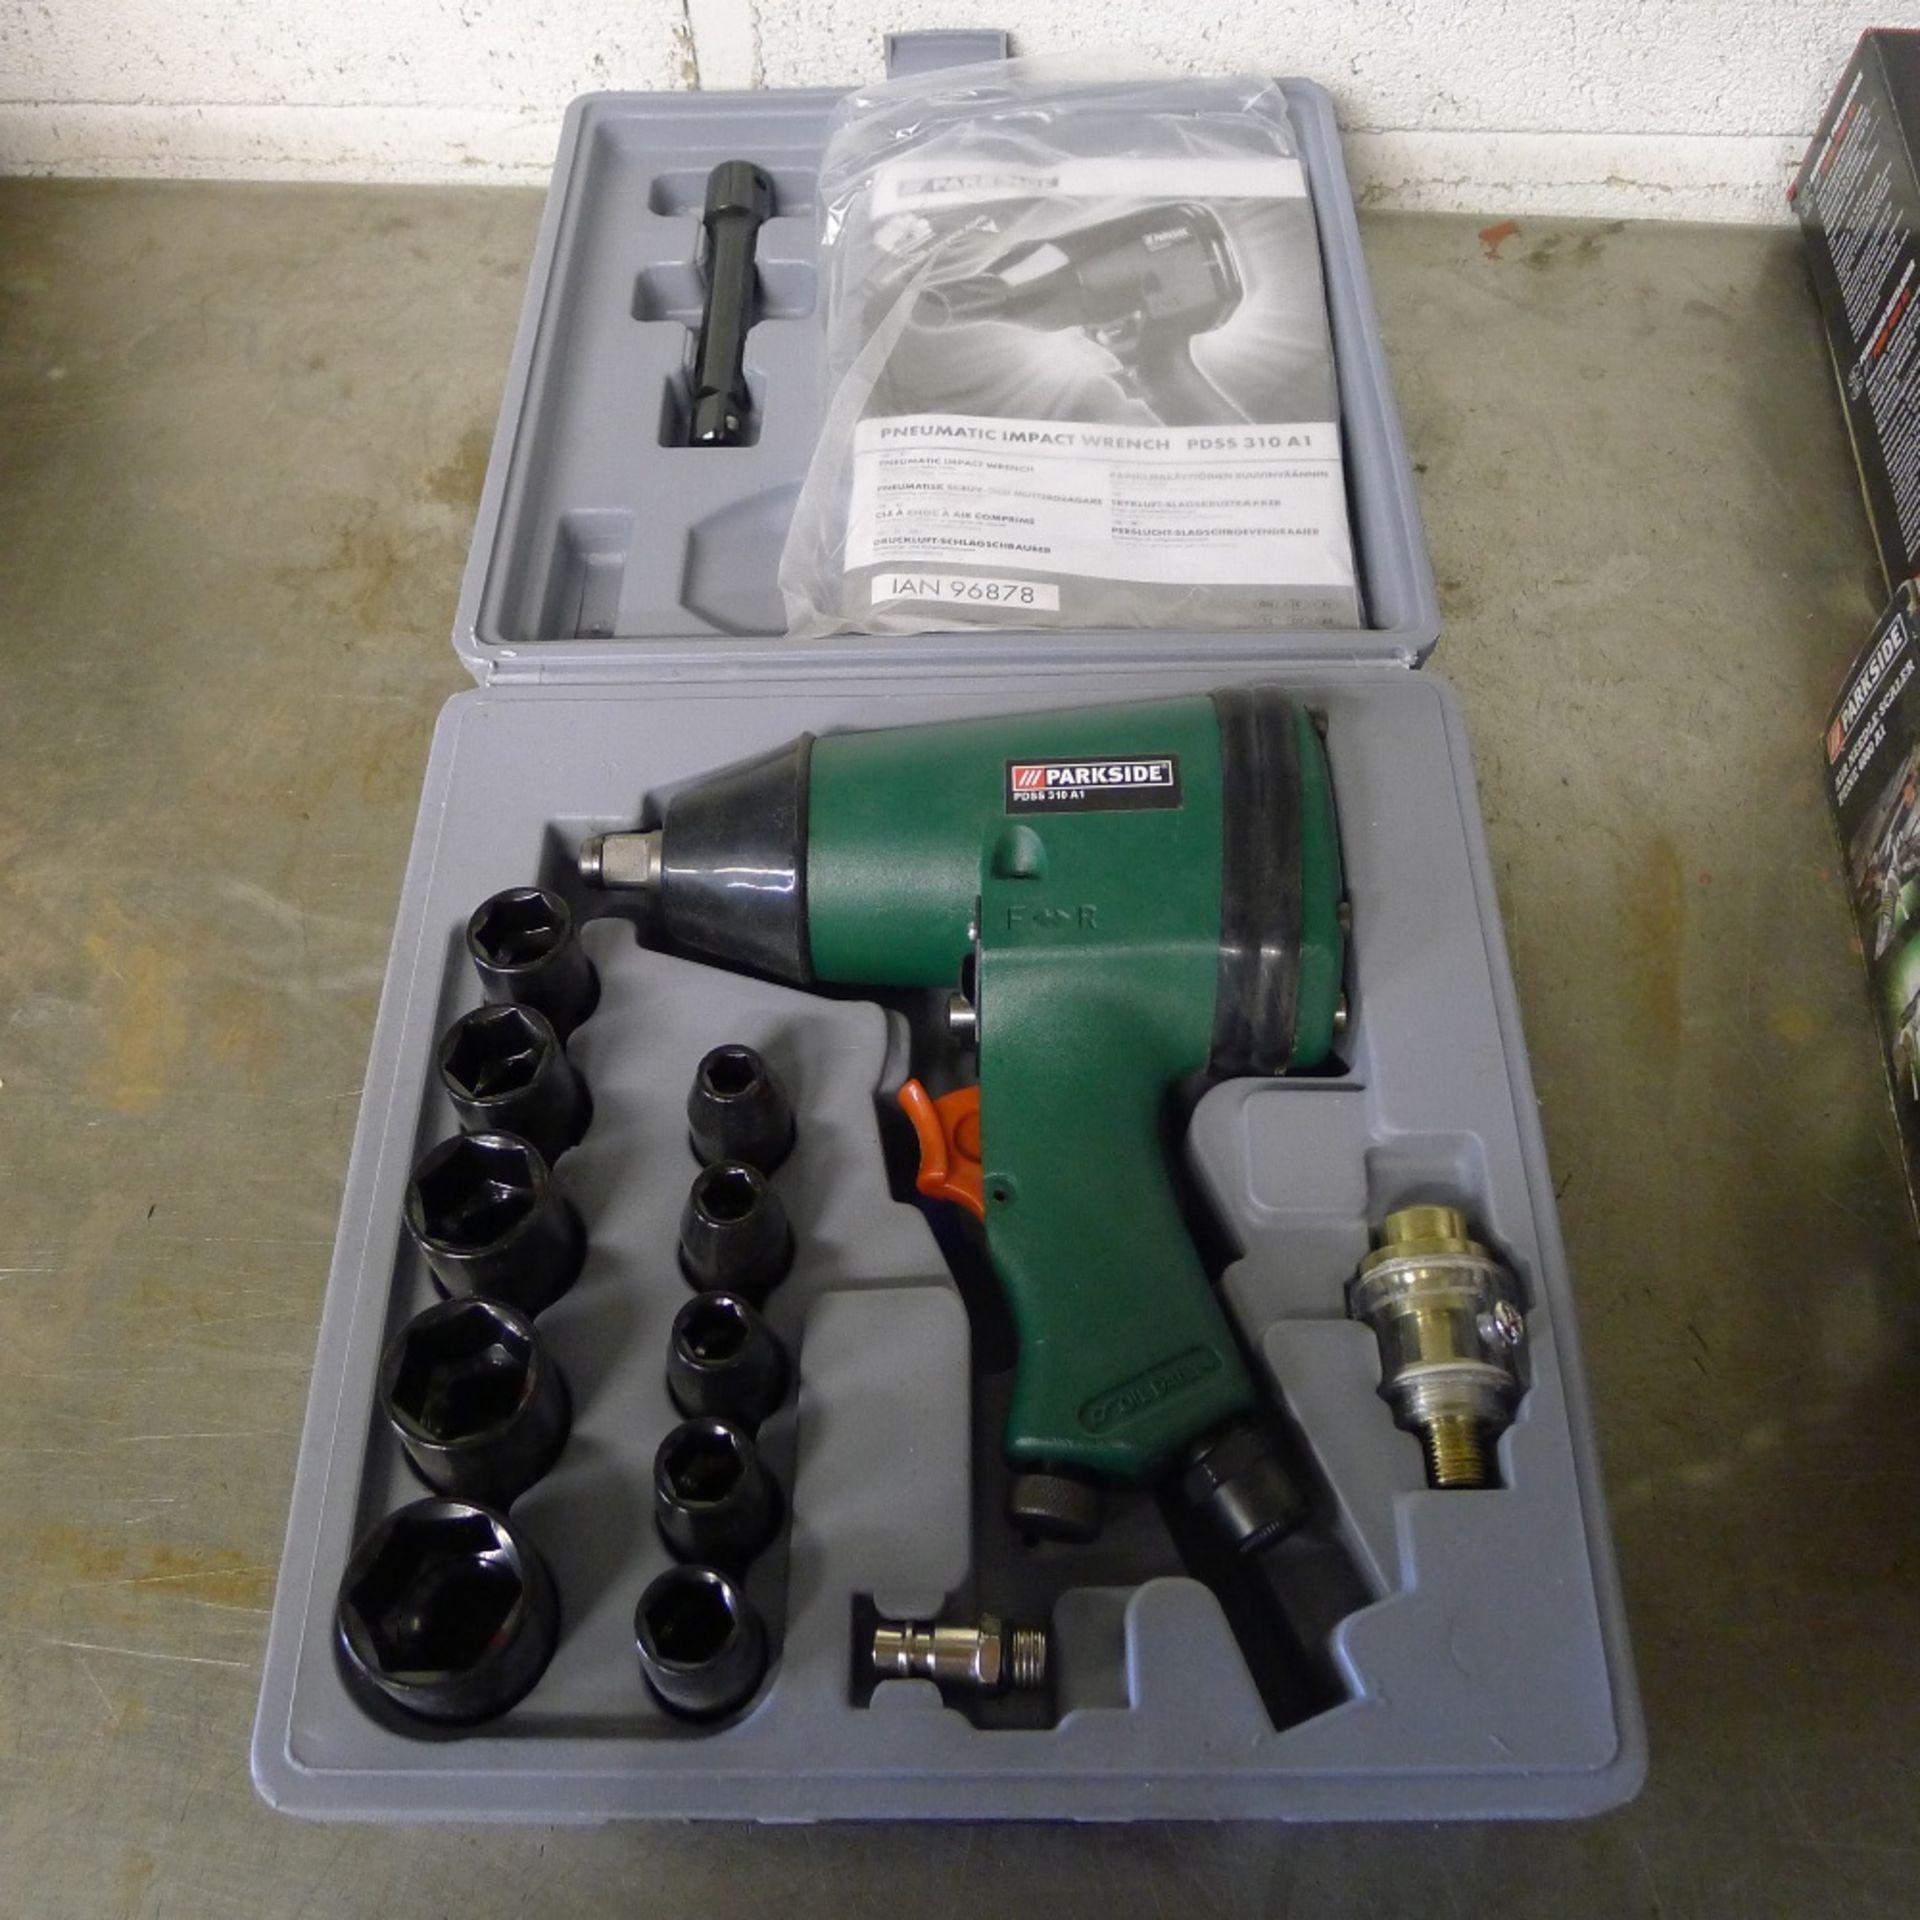 1 Parkside air impact wrench type PDSS 310A1, a 4 way air distributor and an air connector set - Image 3 of 4